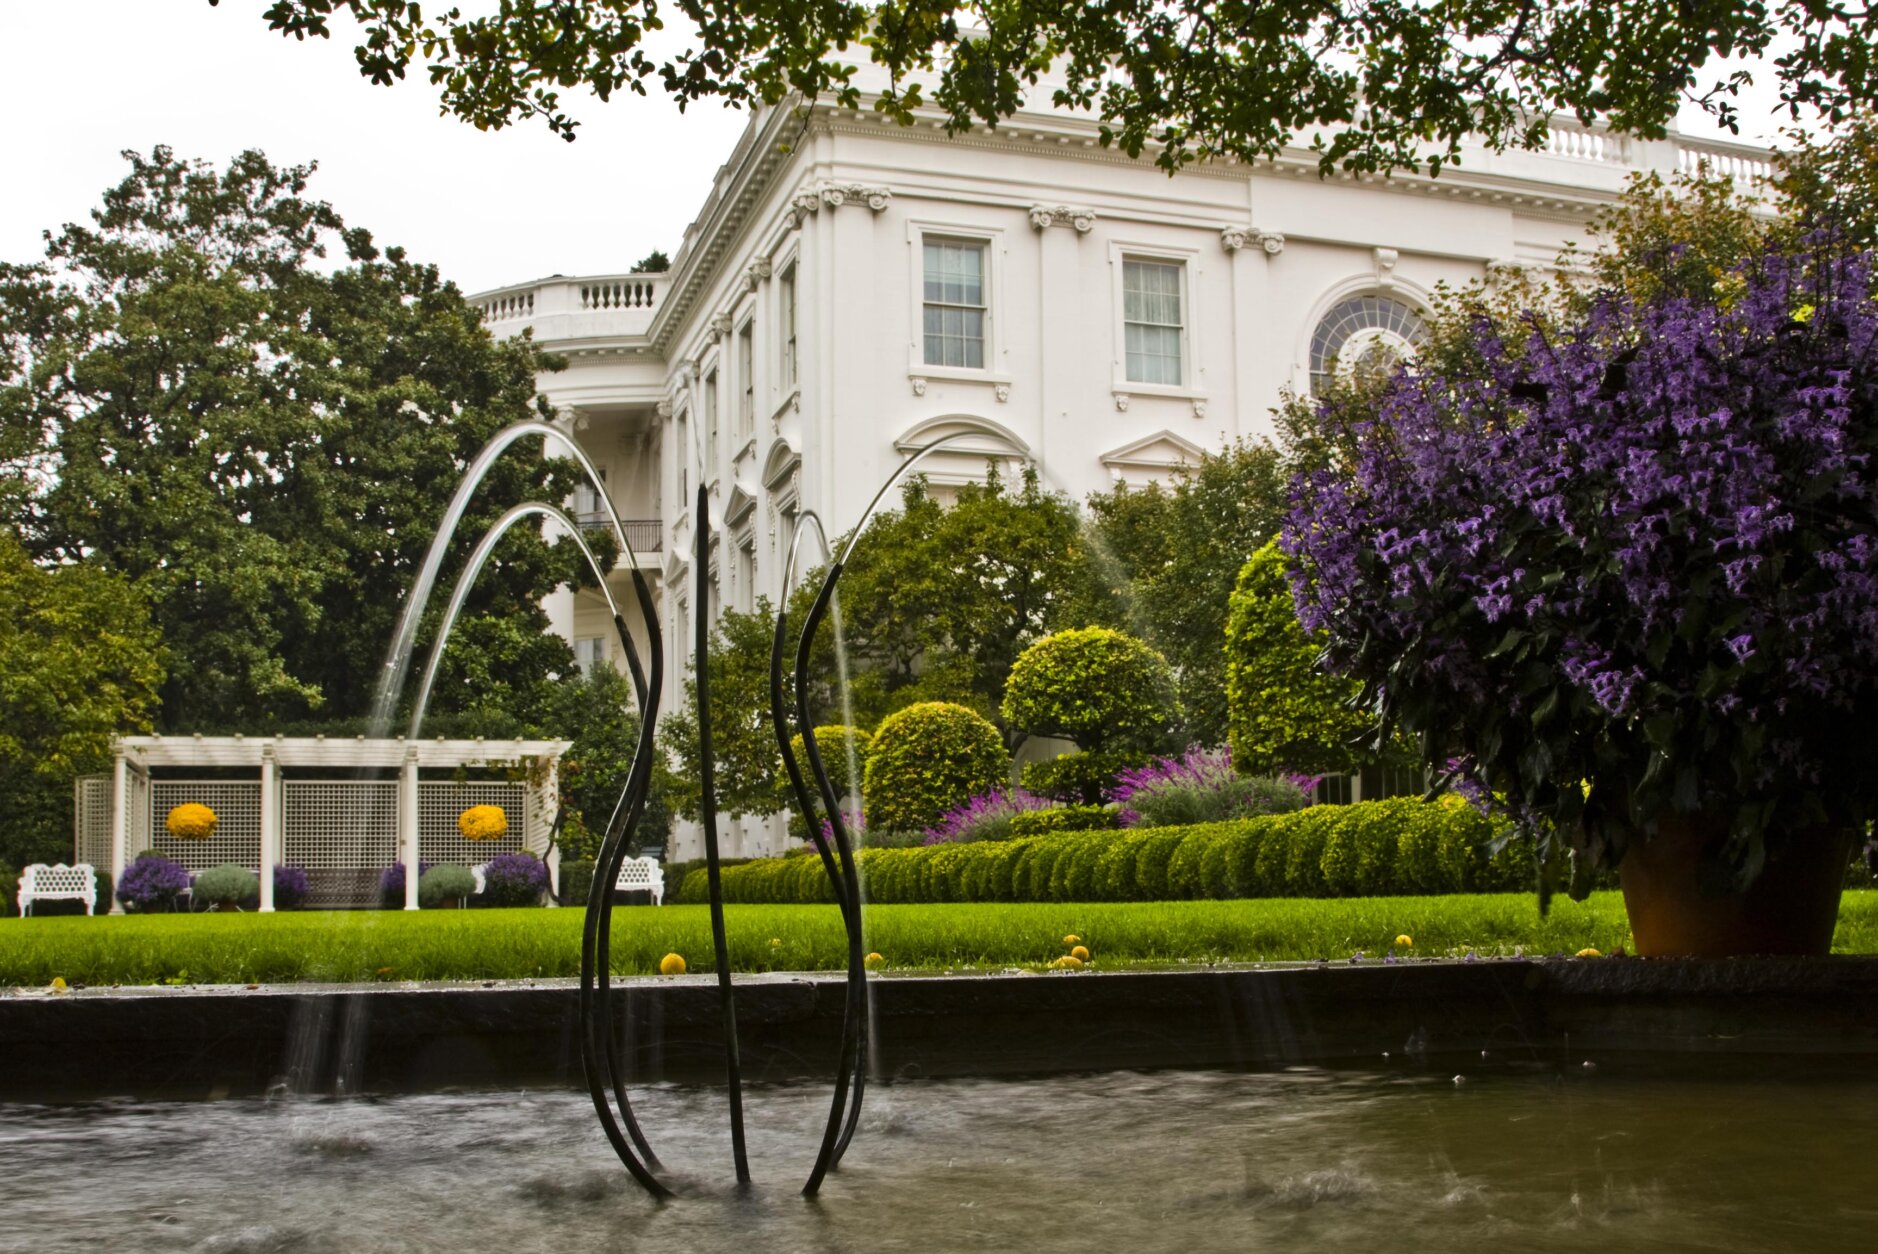 A view of the White House gardens